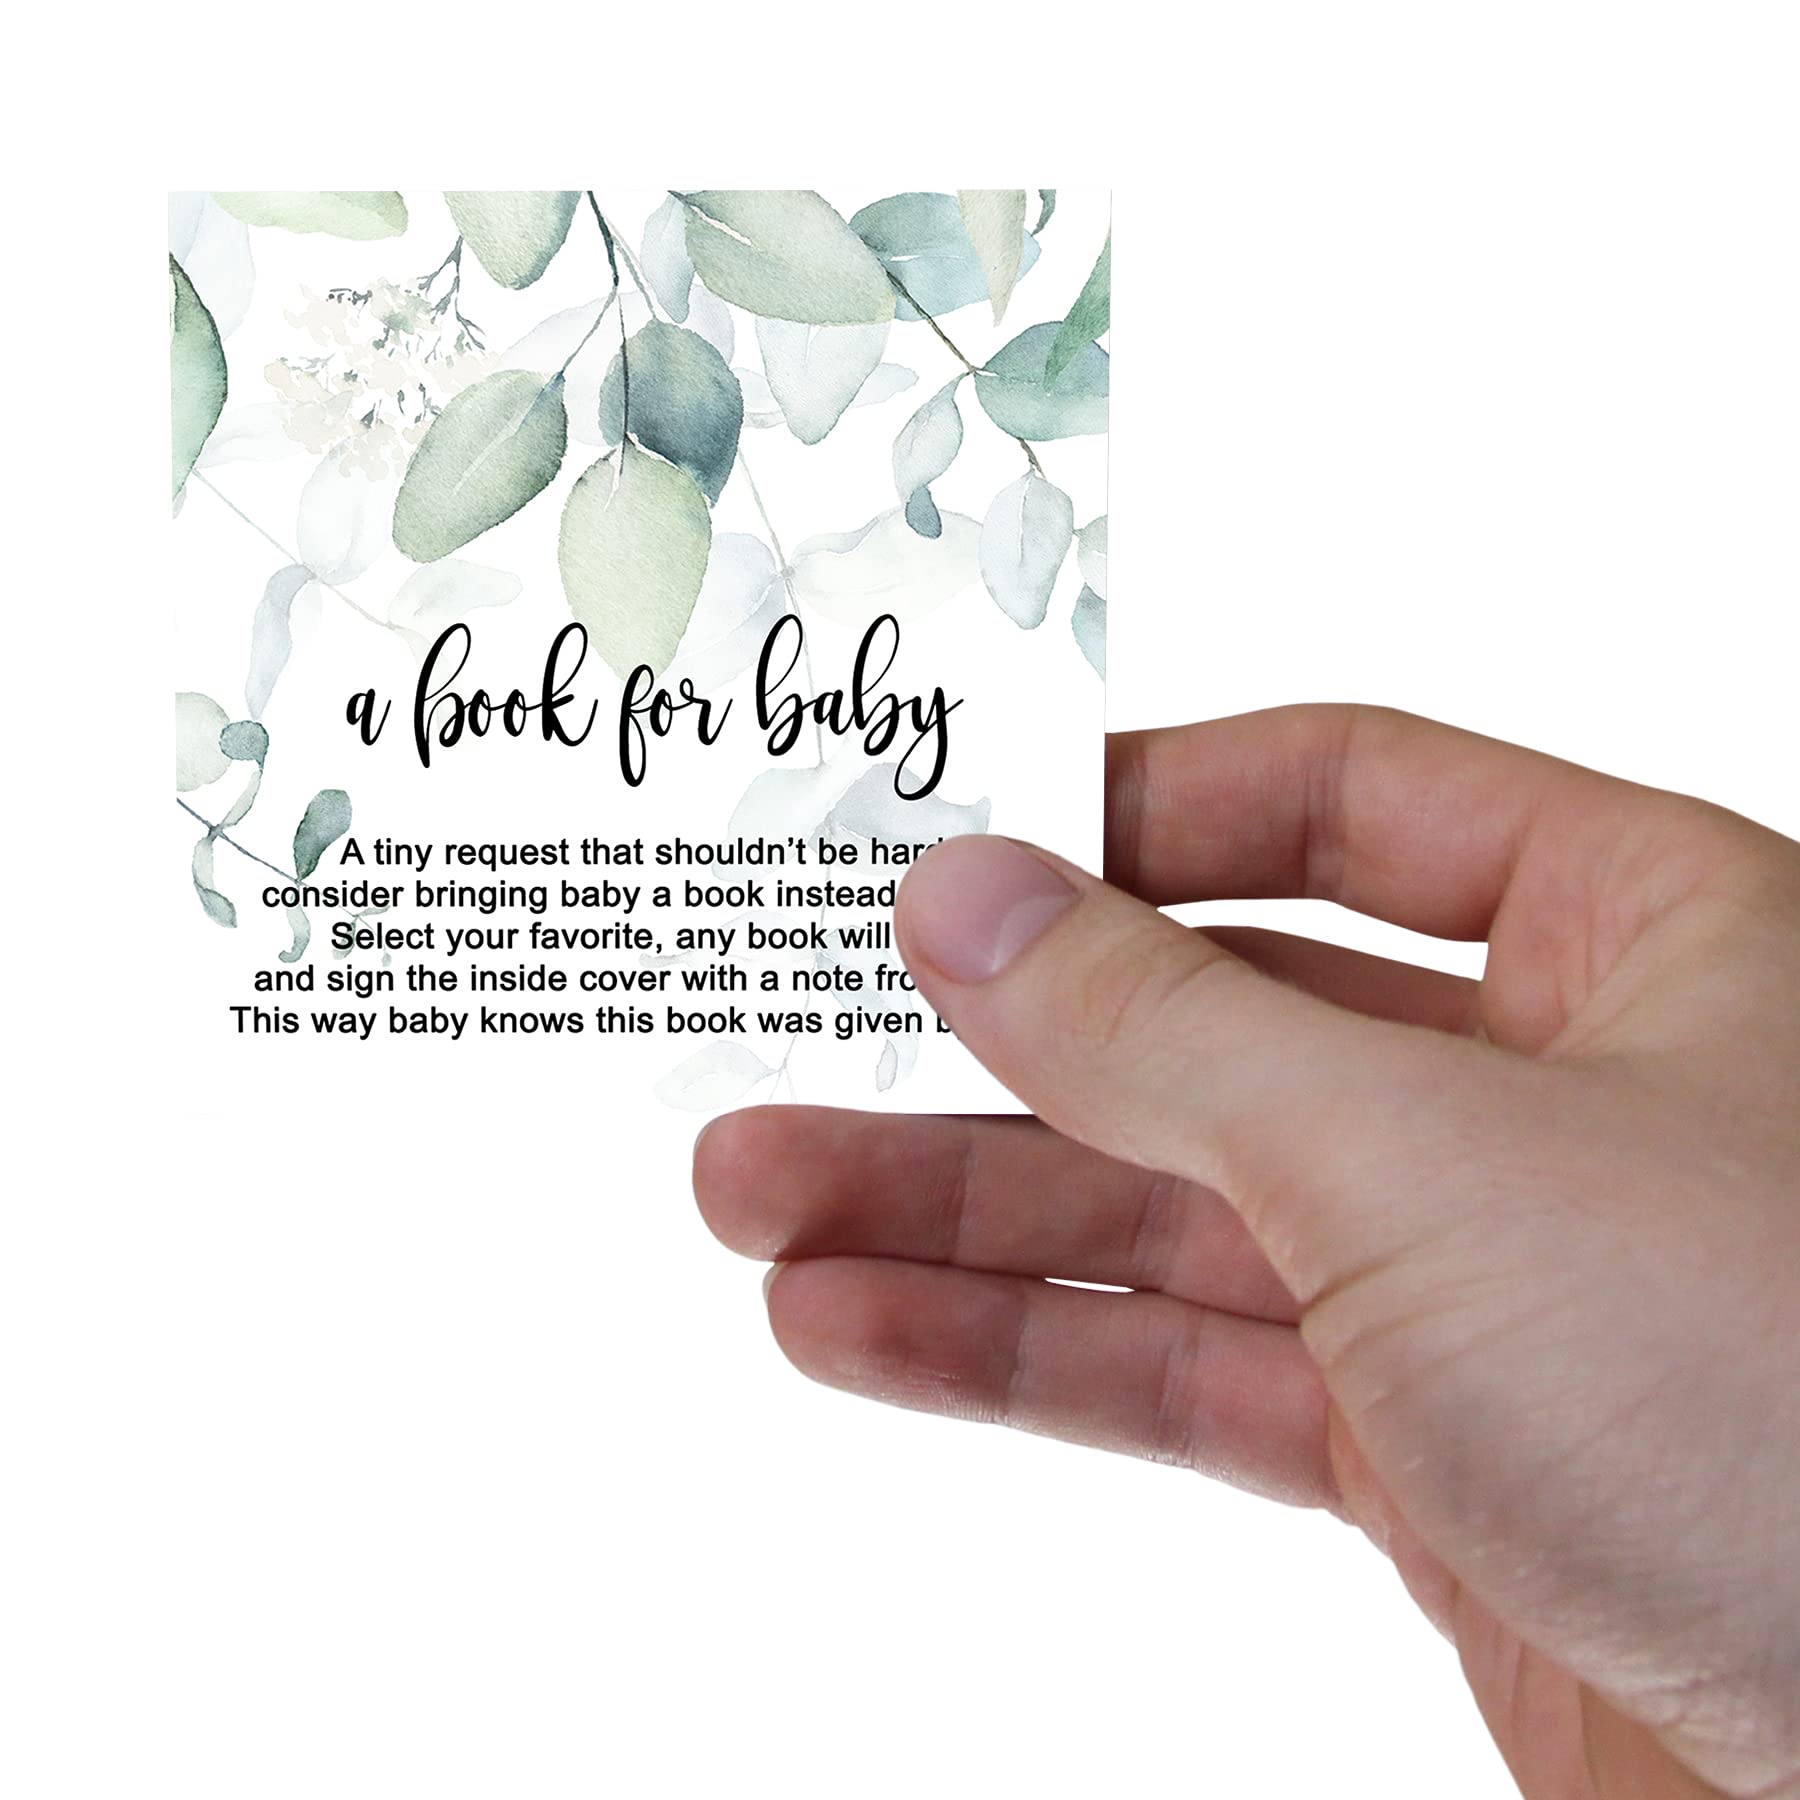 Paper Clever Party Greenery Bring a Book Cards for Baby Shower (25 Pack) Bear Invitation Insert for Girls Parties – Rustic Floral Theme Eucalyptus – 4x4 Printed Card Set